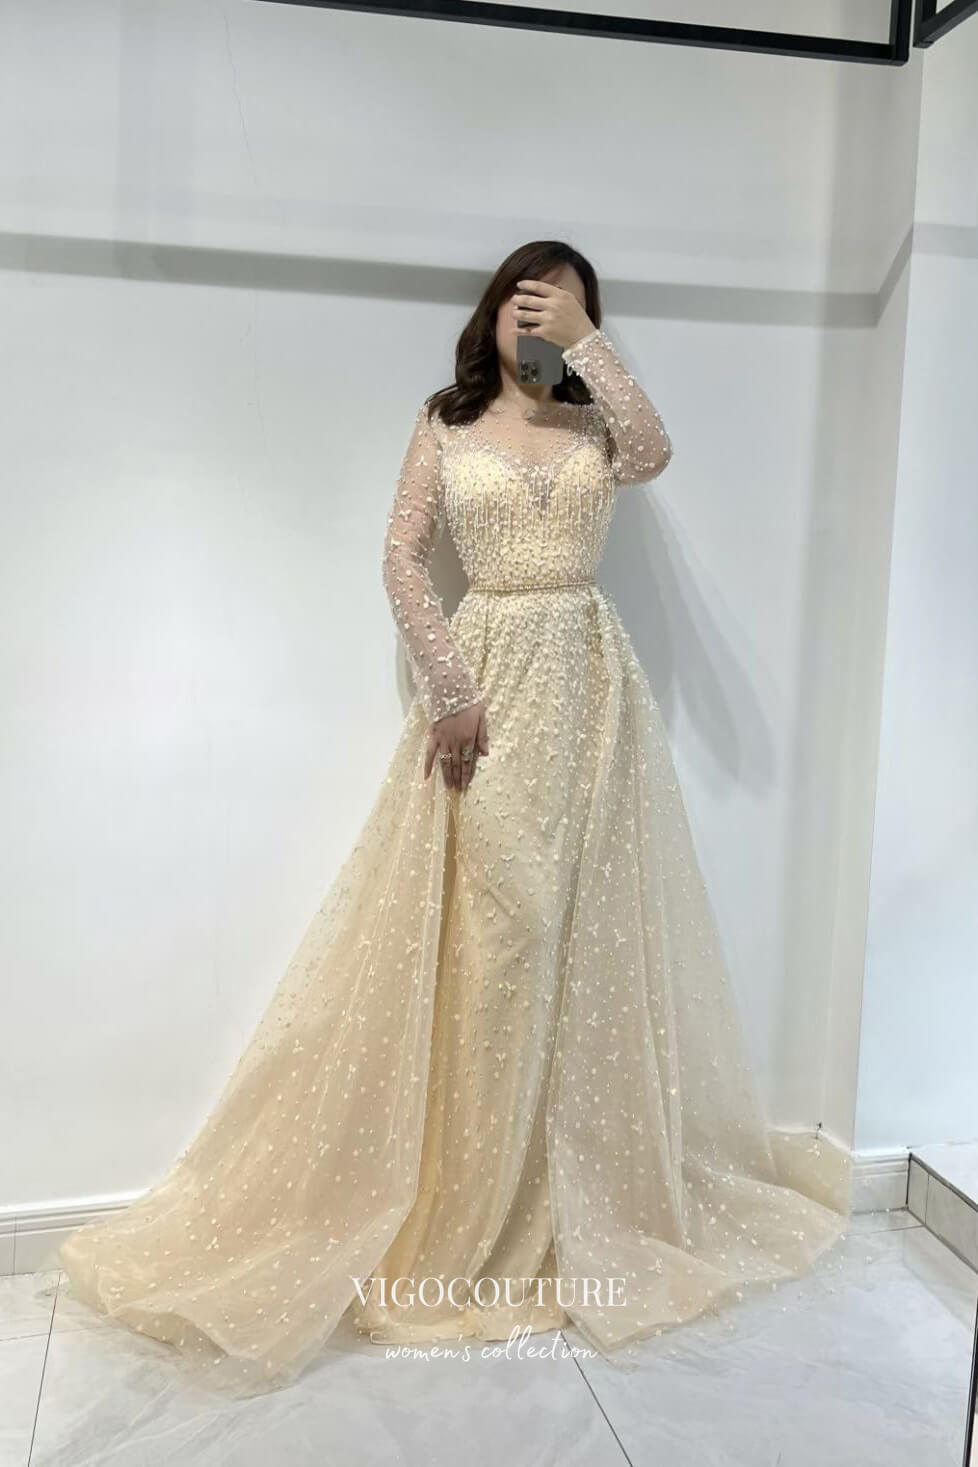 Elegant Champagne Beaded Prom Dress with Long Sleeve and Overskirt 22252-Prom Dresses-vigocouture-Champagne-US2-vigocouture